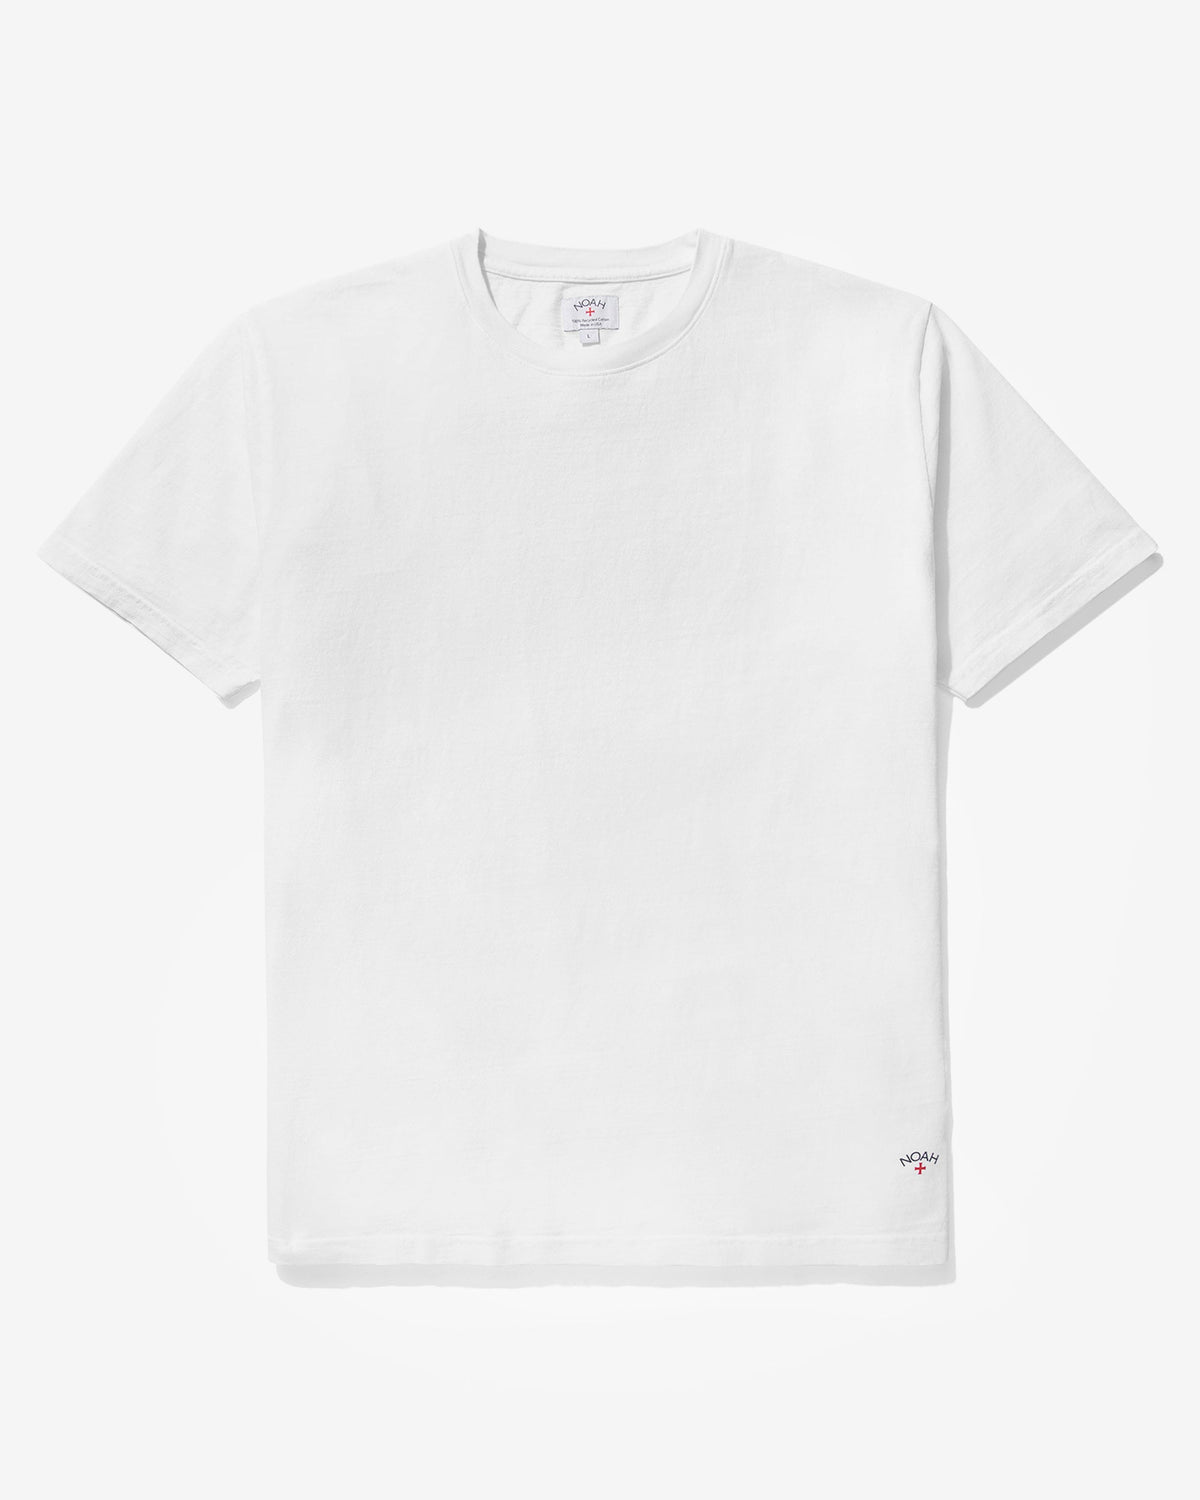 Classic Recycled Cotton Tee